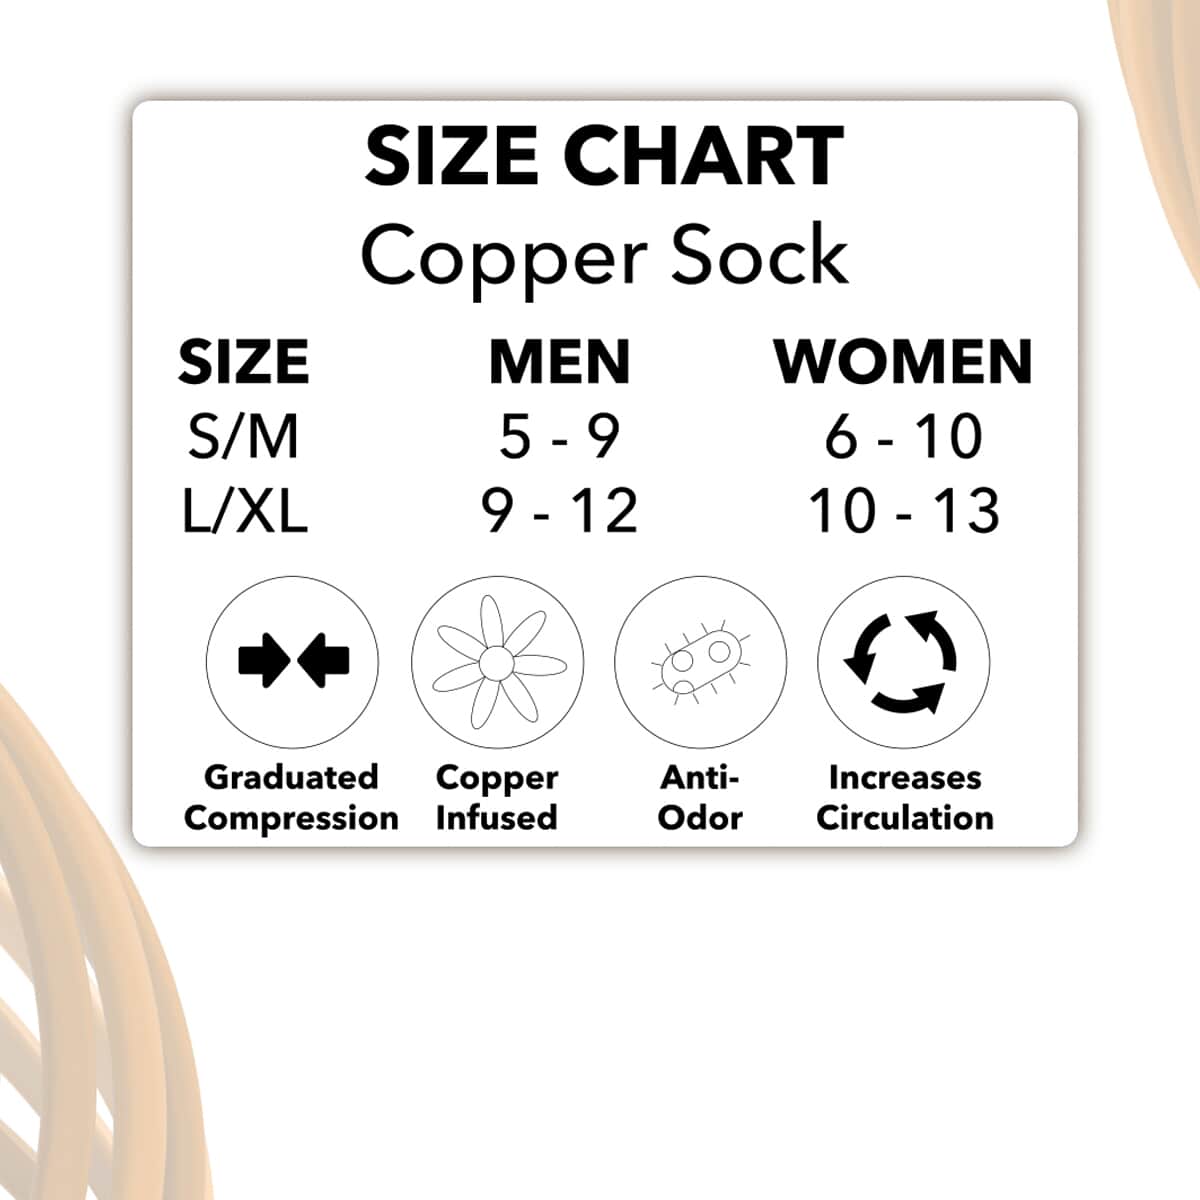 Set of 4 Pairs of Ankle Length Odor Free Copper Compression Socks For Men And Women, Premium Material Moisture Wicking Unisex Copper Infused Socks - Multi Color (S/M) image number 6